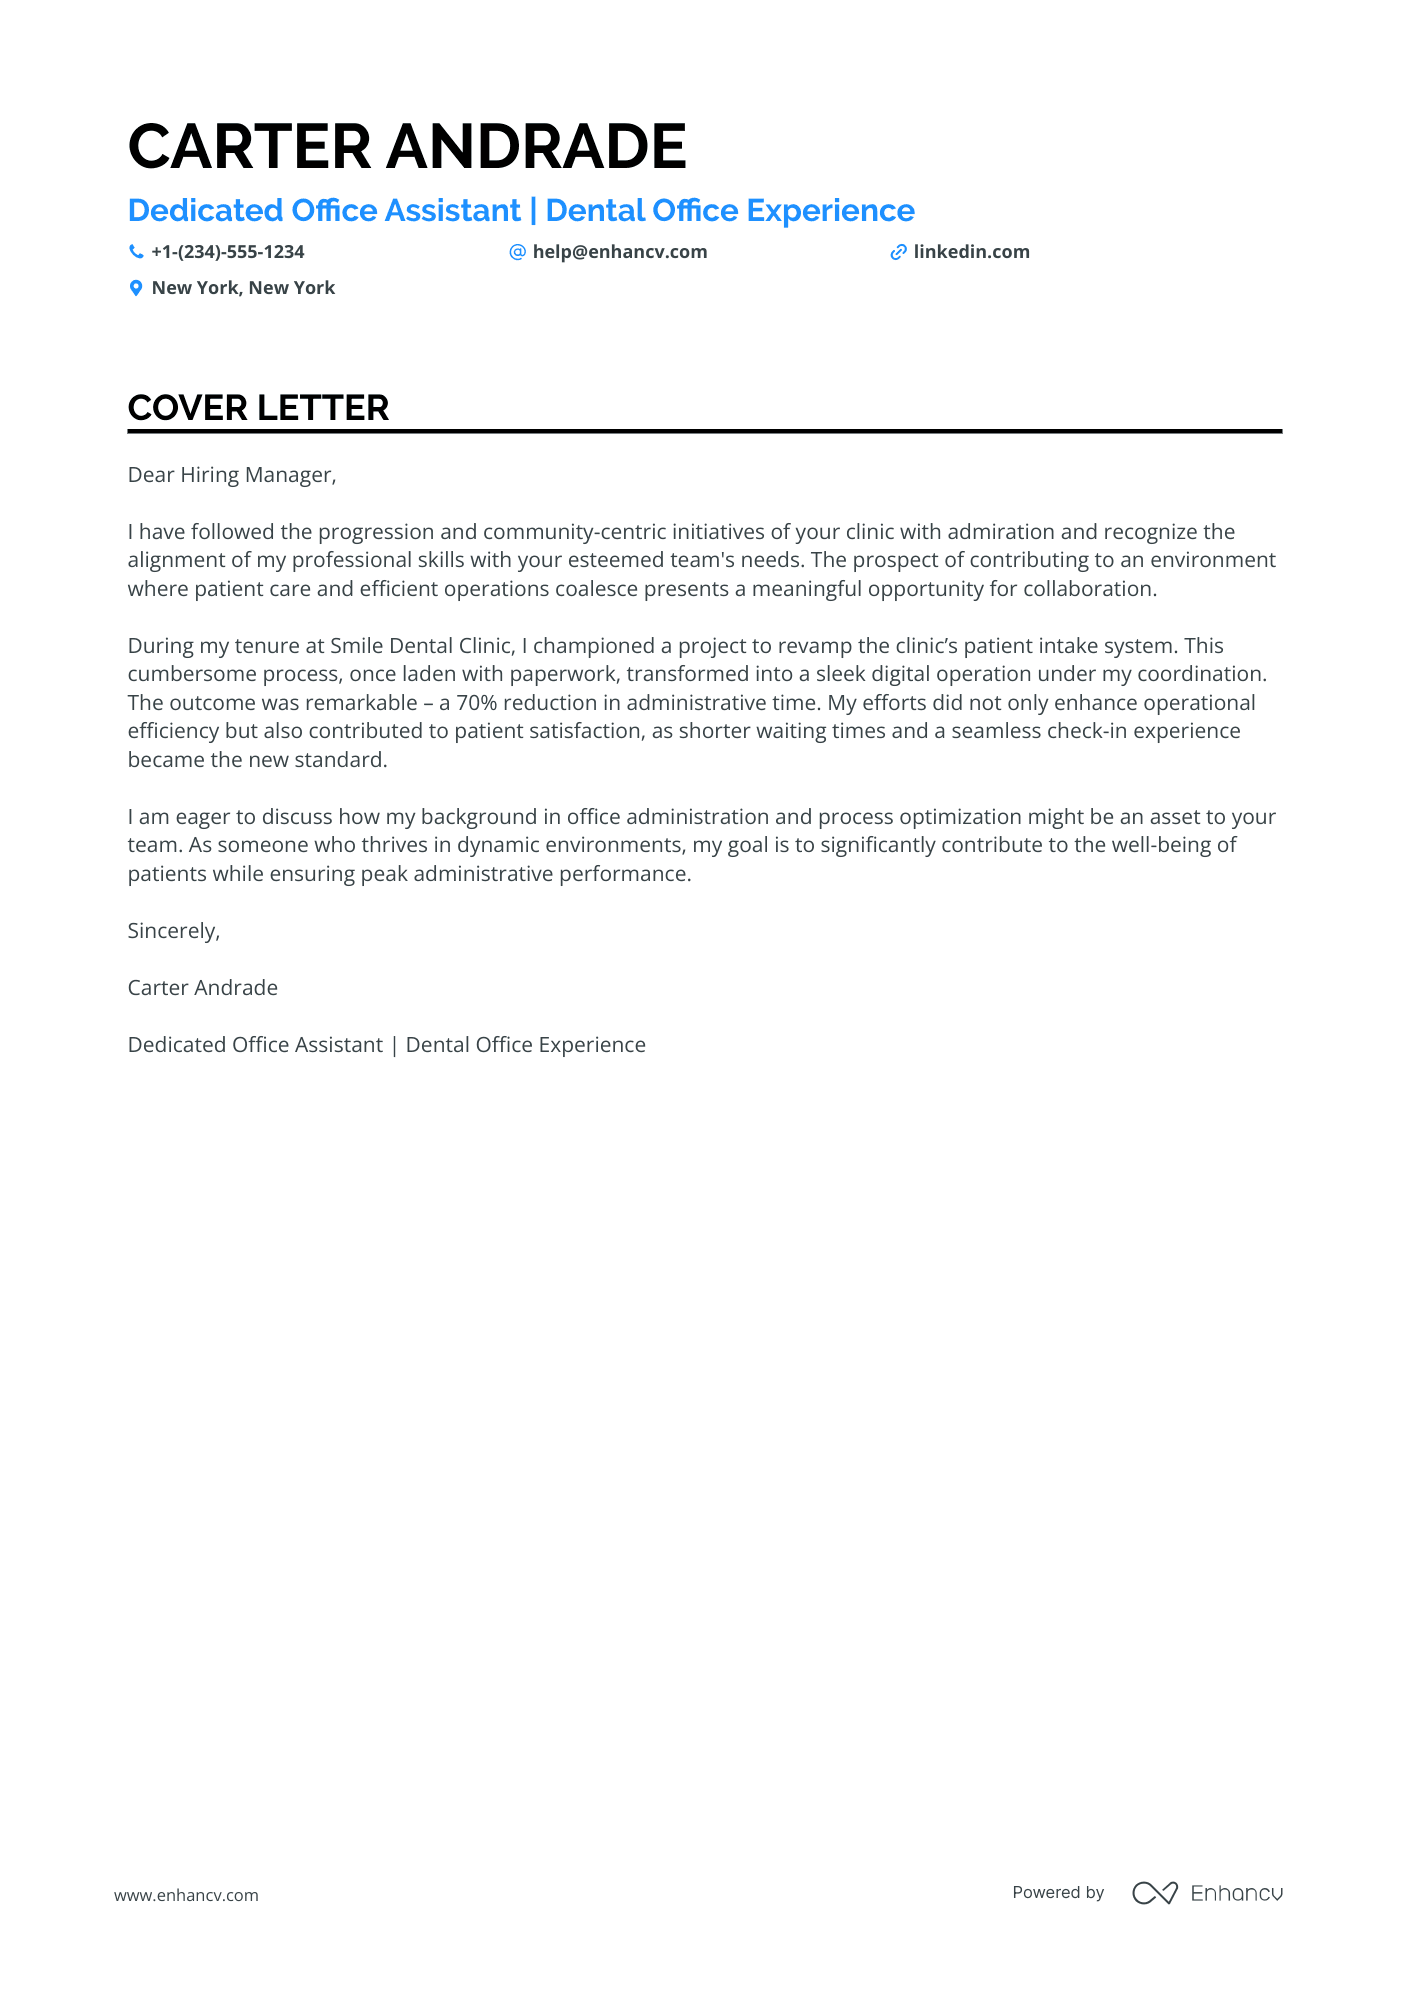 Front Office Assistant cover letter